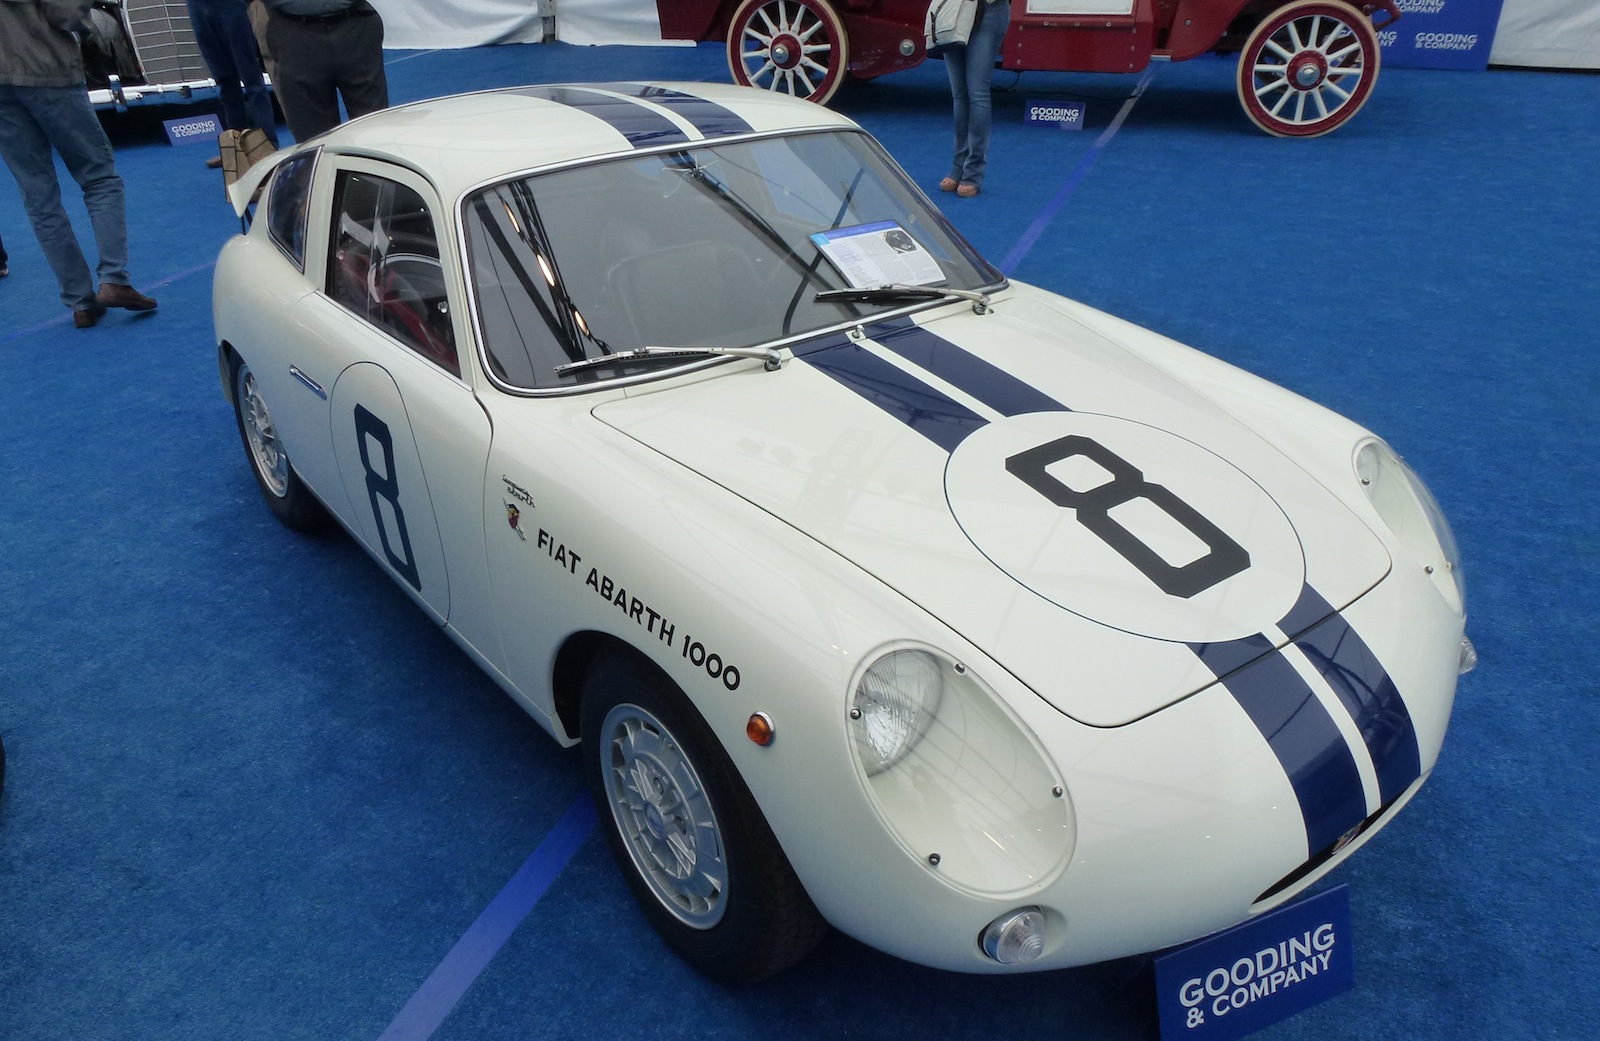 This Fiat-Abarth 1000 GT Was Raced By Bruce McLaren and Owned By Briggs Cunningham